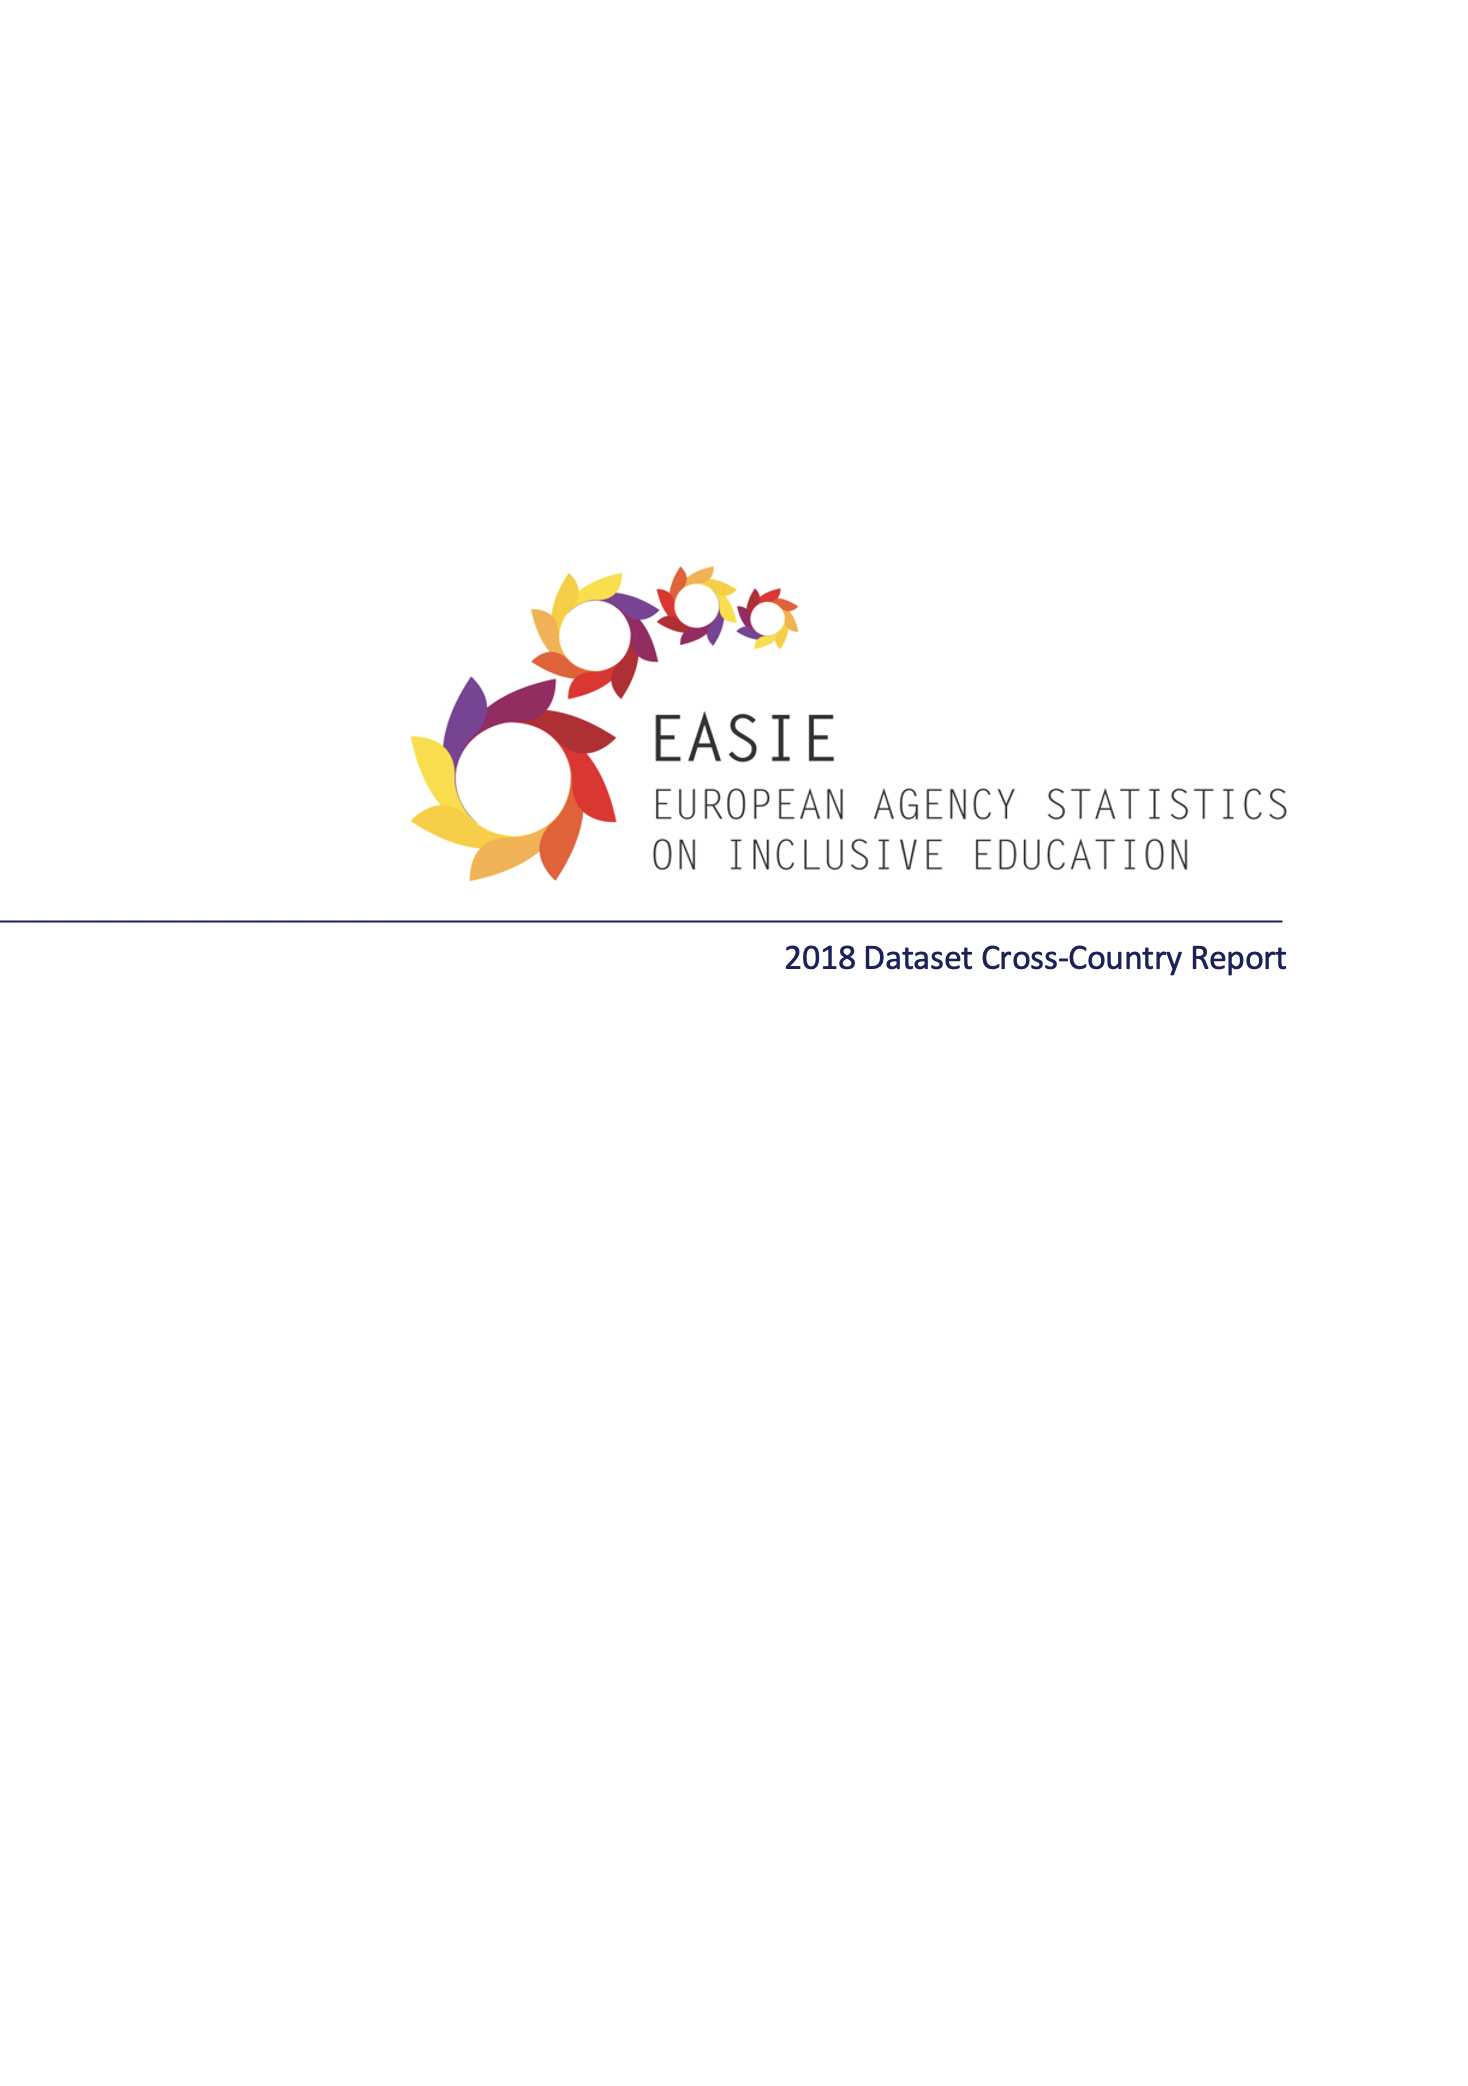 European Agency Statistics on Inclusive Education: 2018 Dataset Cross-Country Report